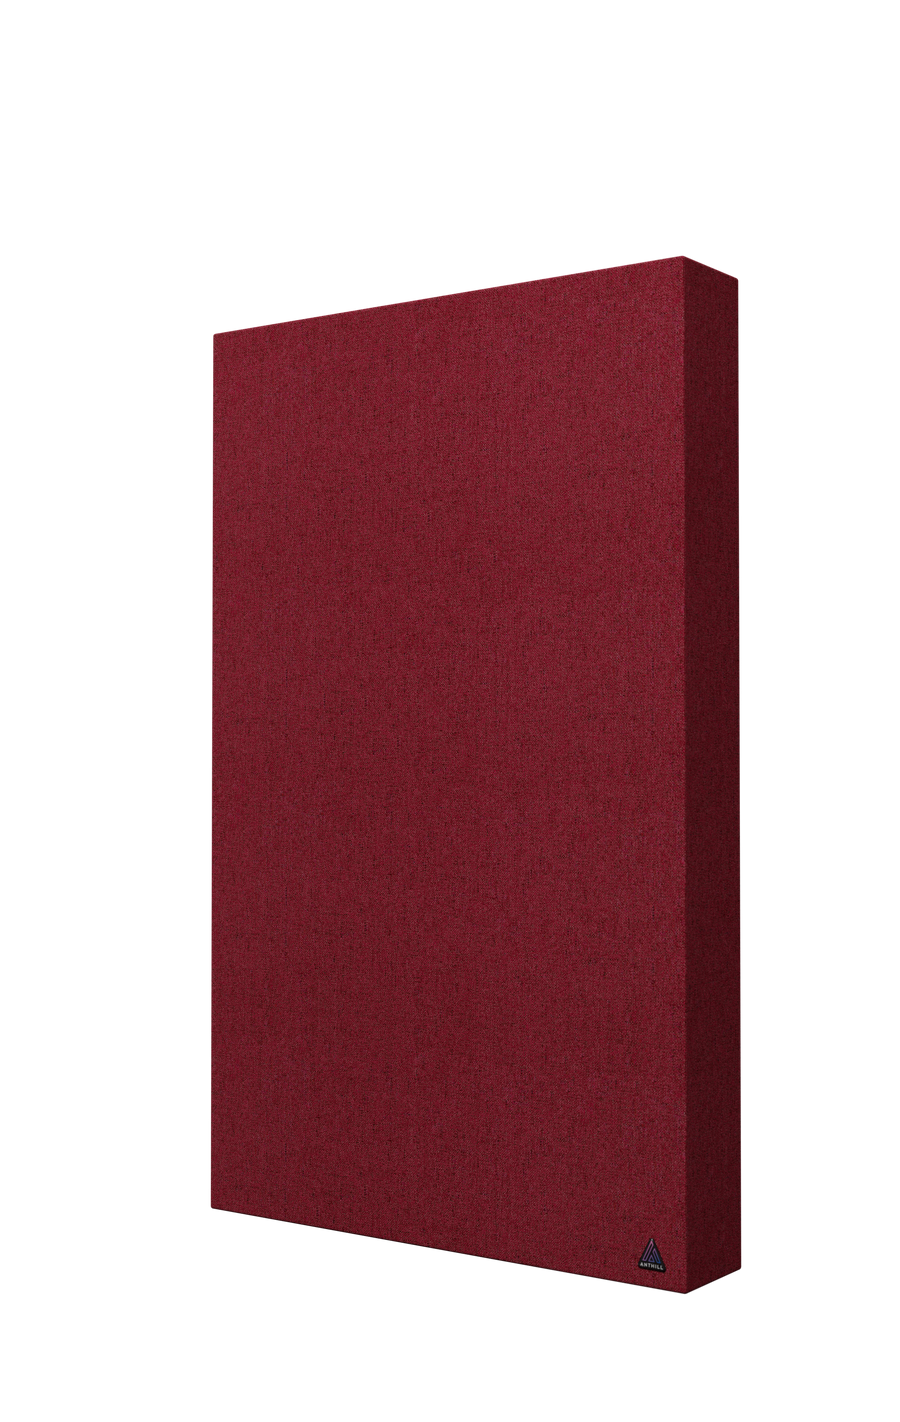 Anthill PRO Broadband Absorber / Acoustic Panel  red